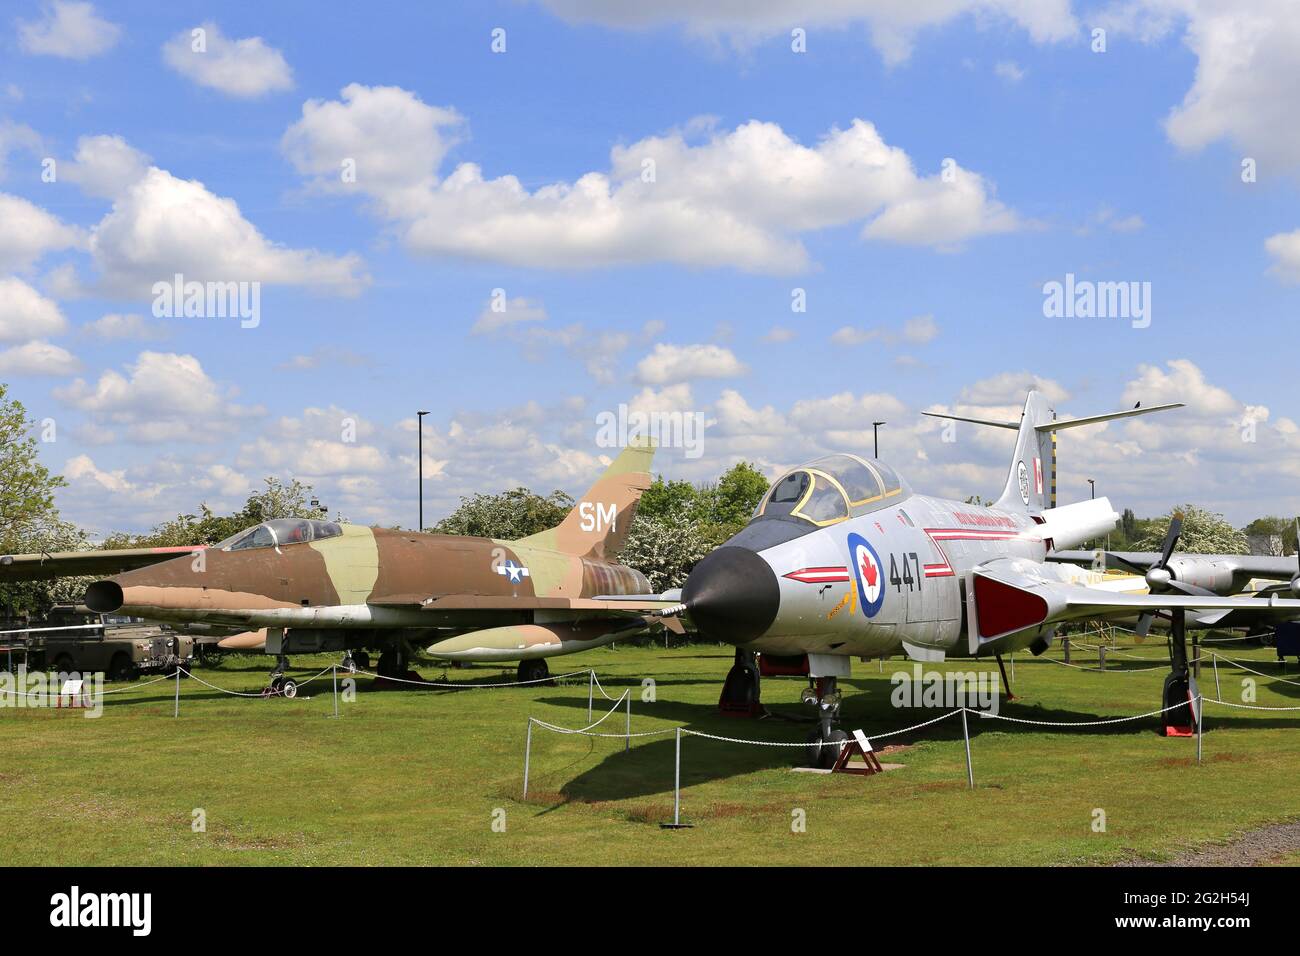 North American Super Sabre F-100D and McDonnell Voodoo TF-101B, Midland Air Museum, Coventry Airport, Baginton, Warwickshire, England, UK, Europe Stock Photo